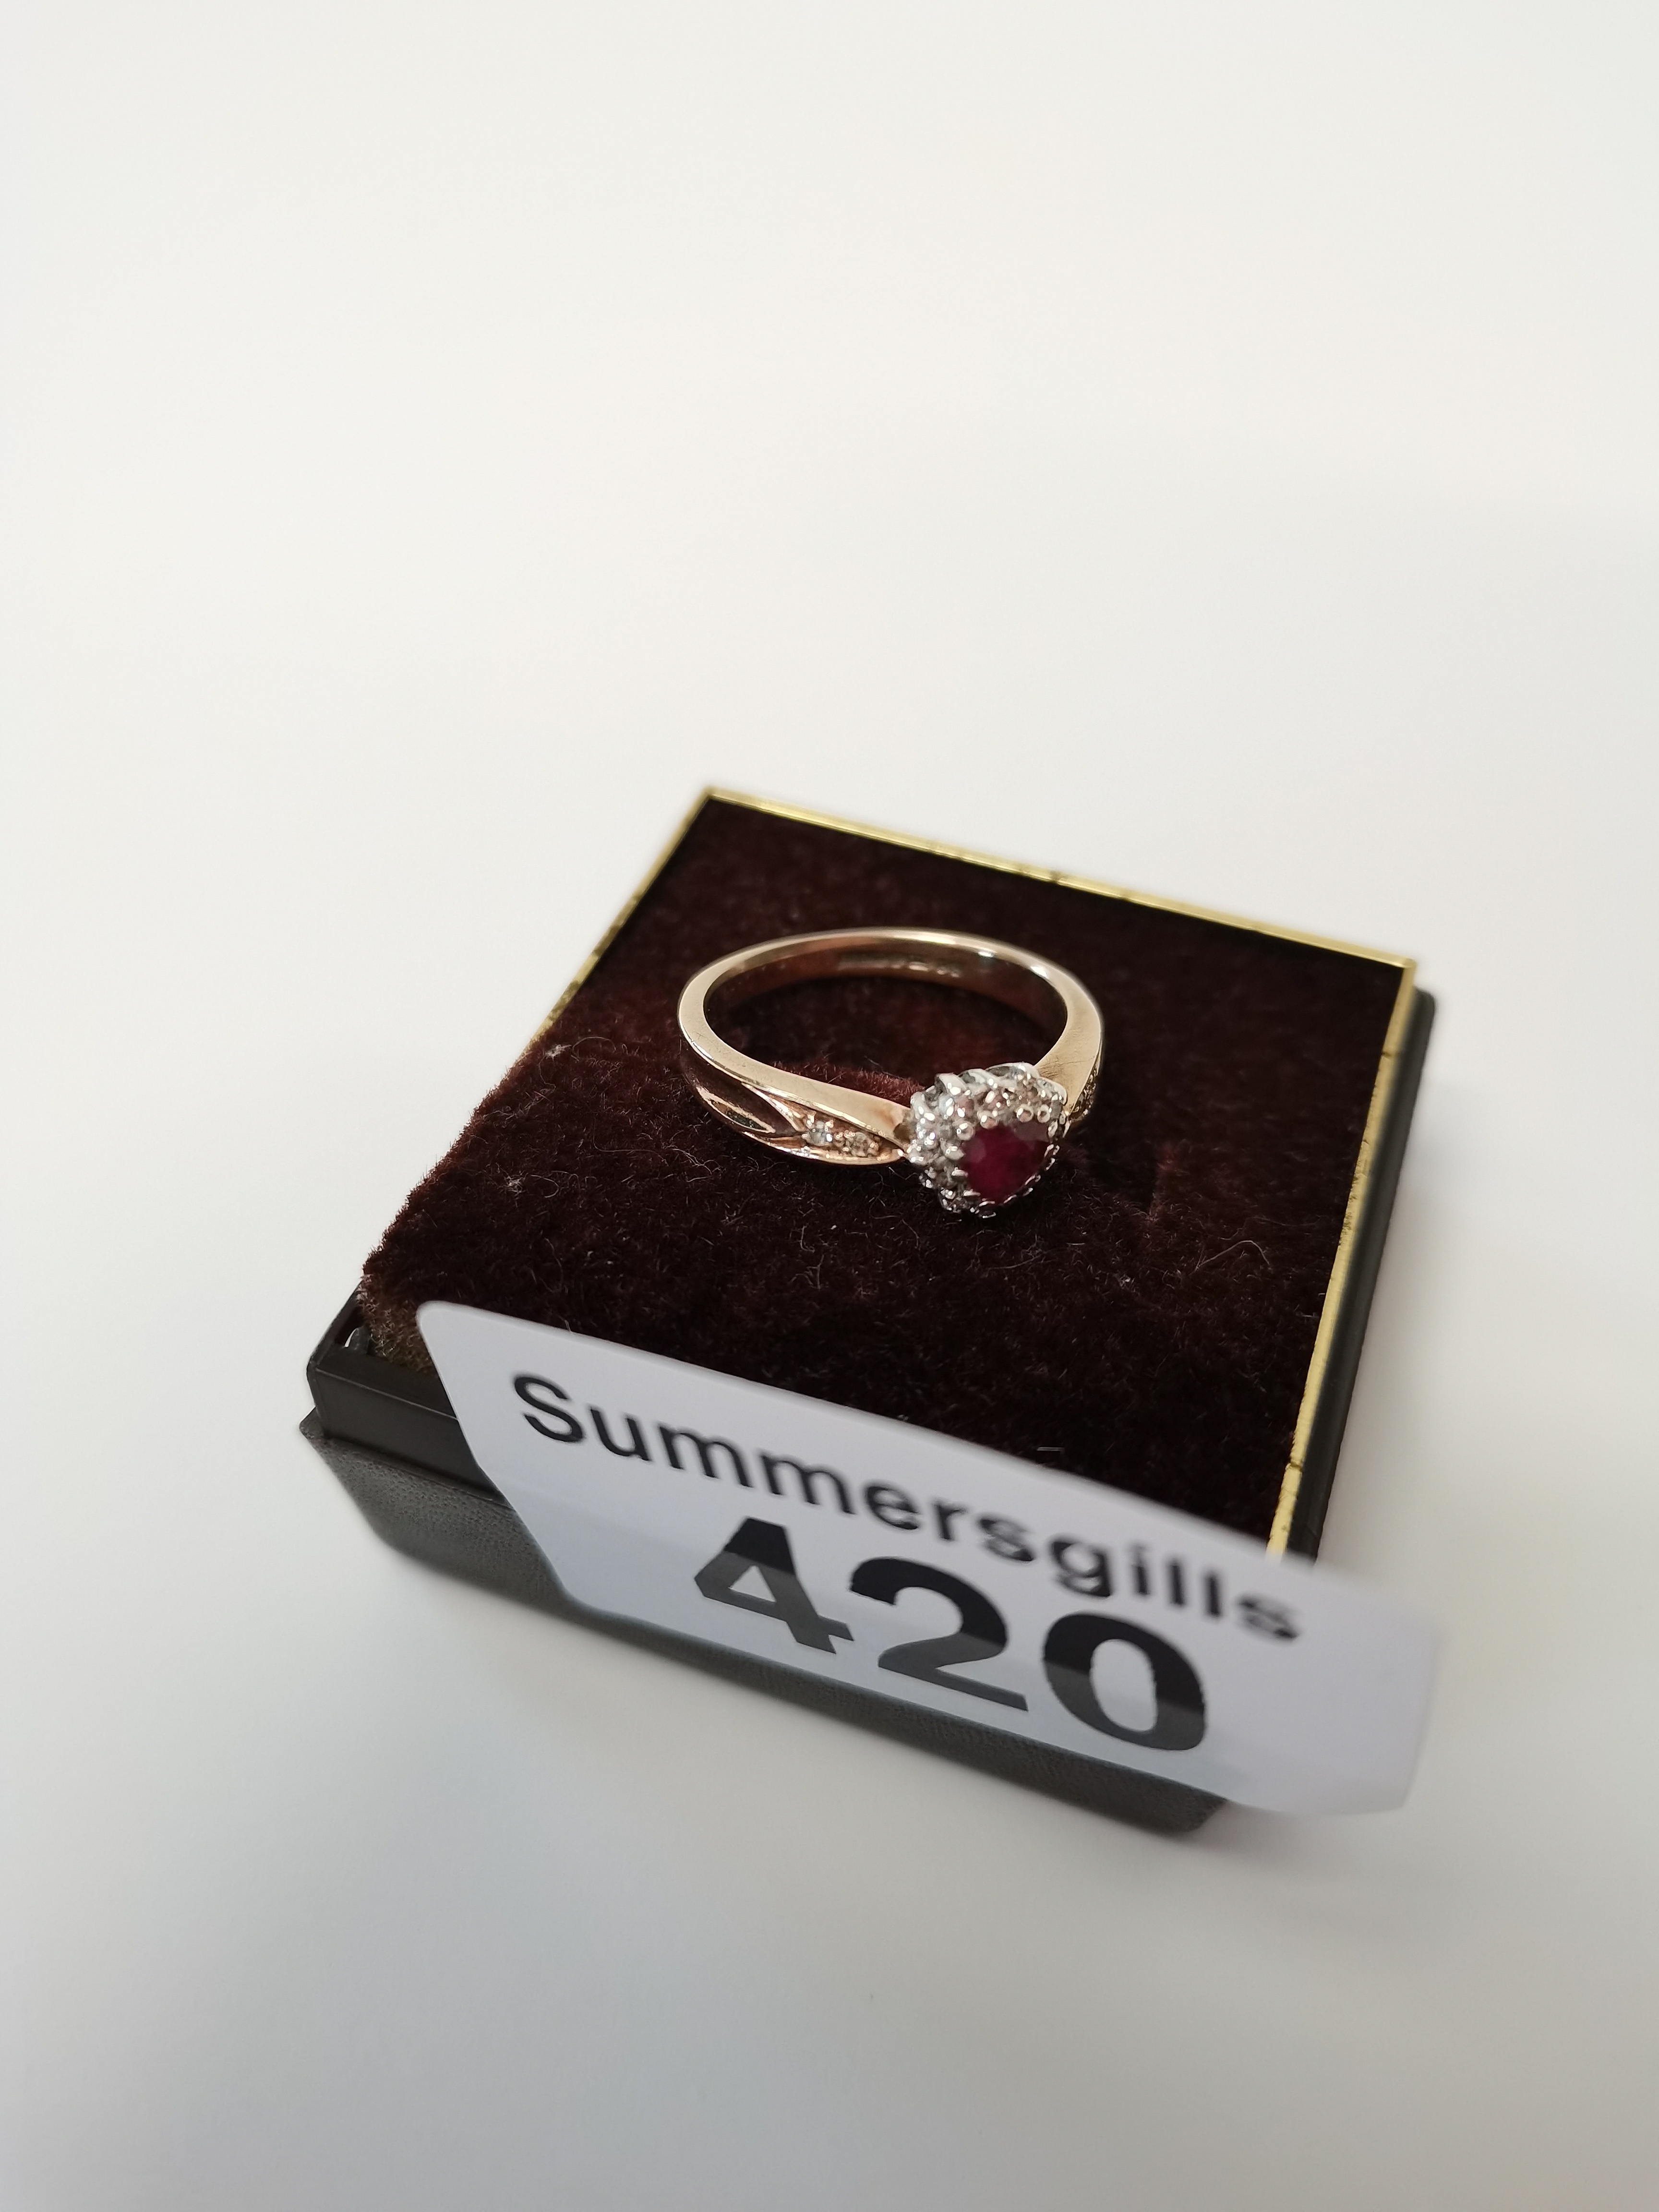 Diamond and Ruby ring - Image 3 of 3